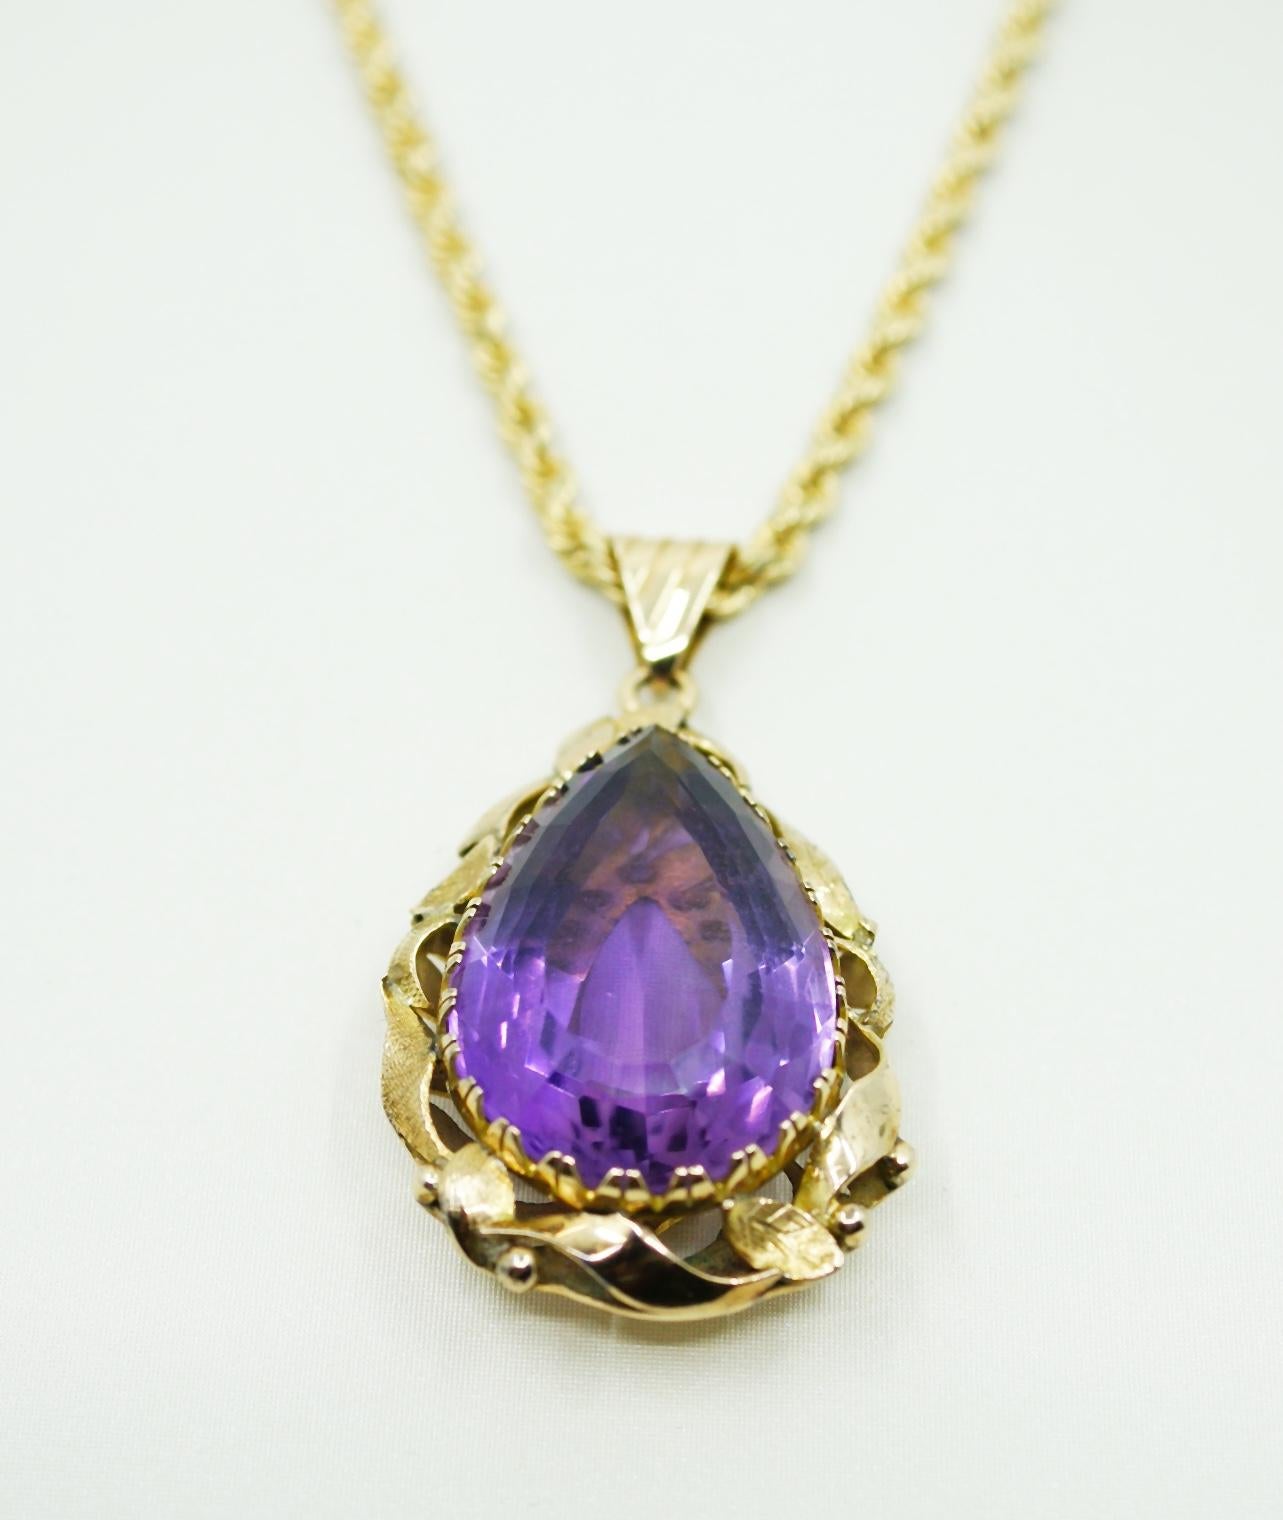 An exquisite 65 Carat Pear Shape Vibrant Amethyst set in a 14K Yellow Gold Pendent

• Amethyst Weight: 65 Carats
• 14K Yellow Gold 
• Signed: JC
• Pendent Measures: 2 inches long (5.5cm) 1.5 inches wide (3cm)
• Grams: 19.3 / 12.41 DWT / *Chain not